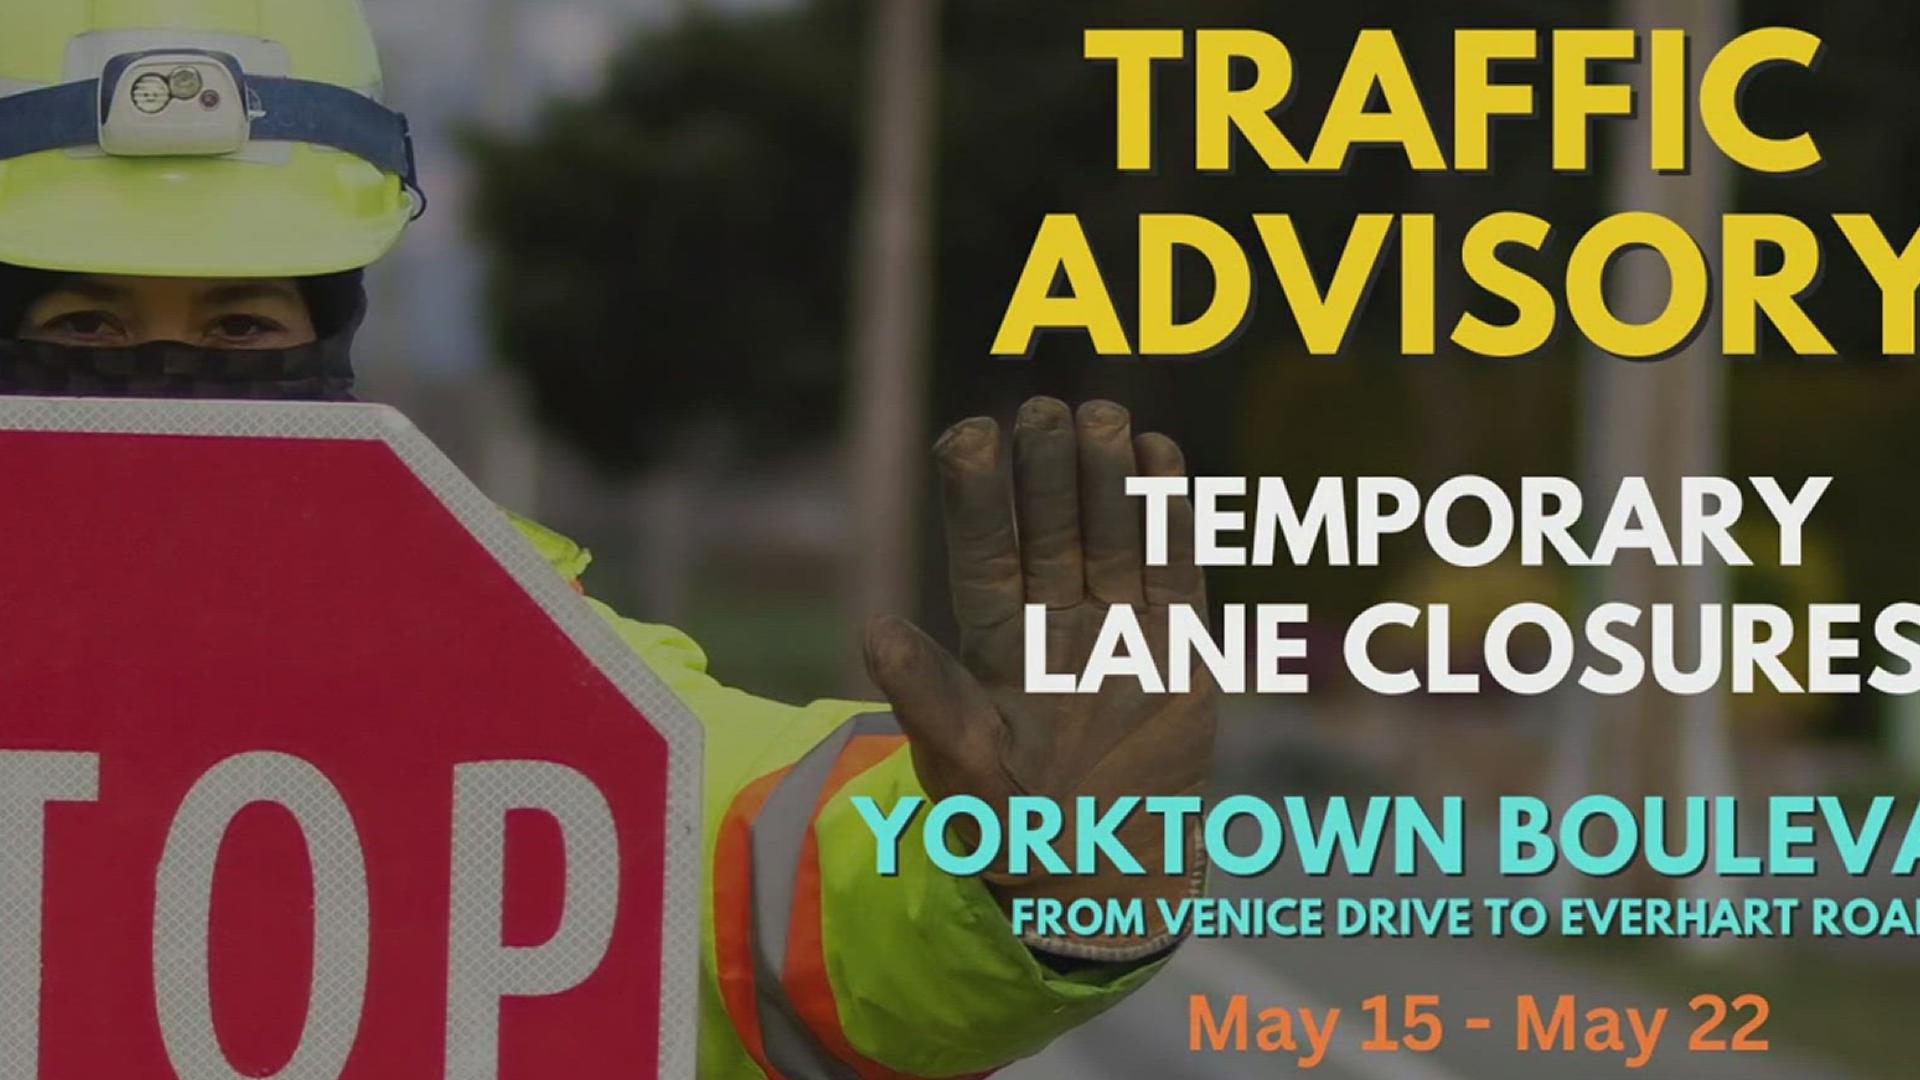 You can expect delays during the closure and are encouraged to plan ahead and seek alternate routes.